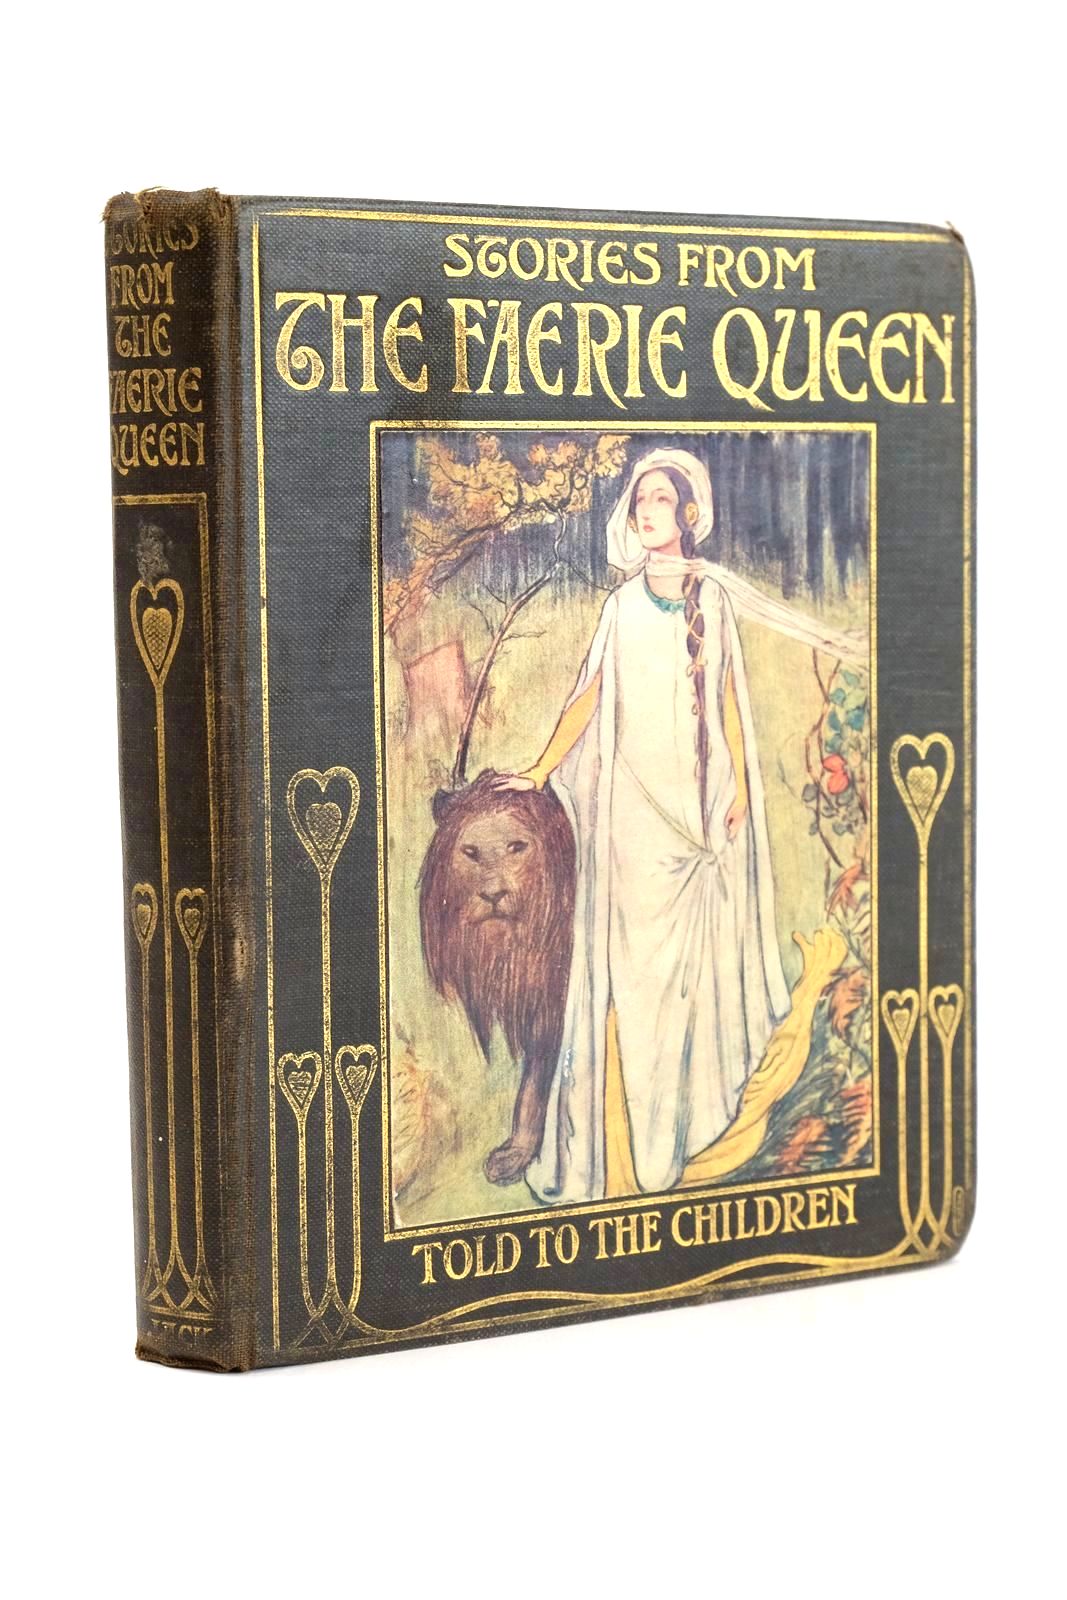 Photo of STORIES FROM THE FAERIE QUEEN written by Lang, Jeanie illustrated by Le Quesne, Rose published by T.C. & E.C. Jack (STOCK CODE: 1324617)  for sale by Stella & Rose's Books